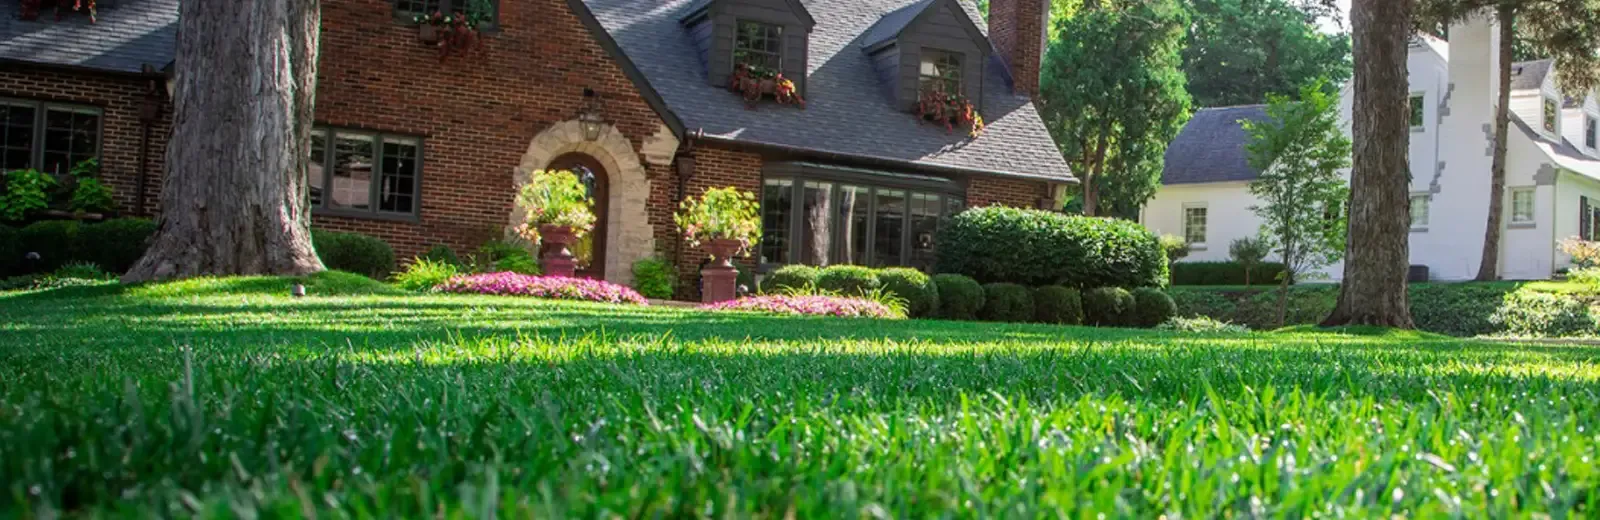 Green healthy grass, front lawn of brick home